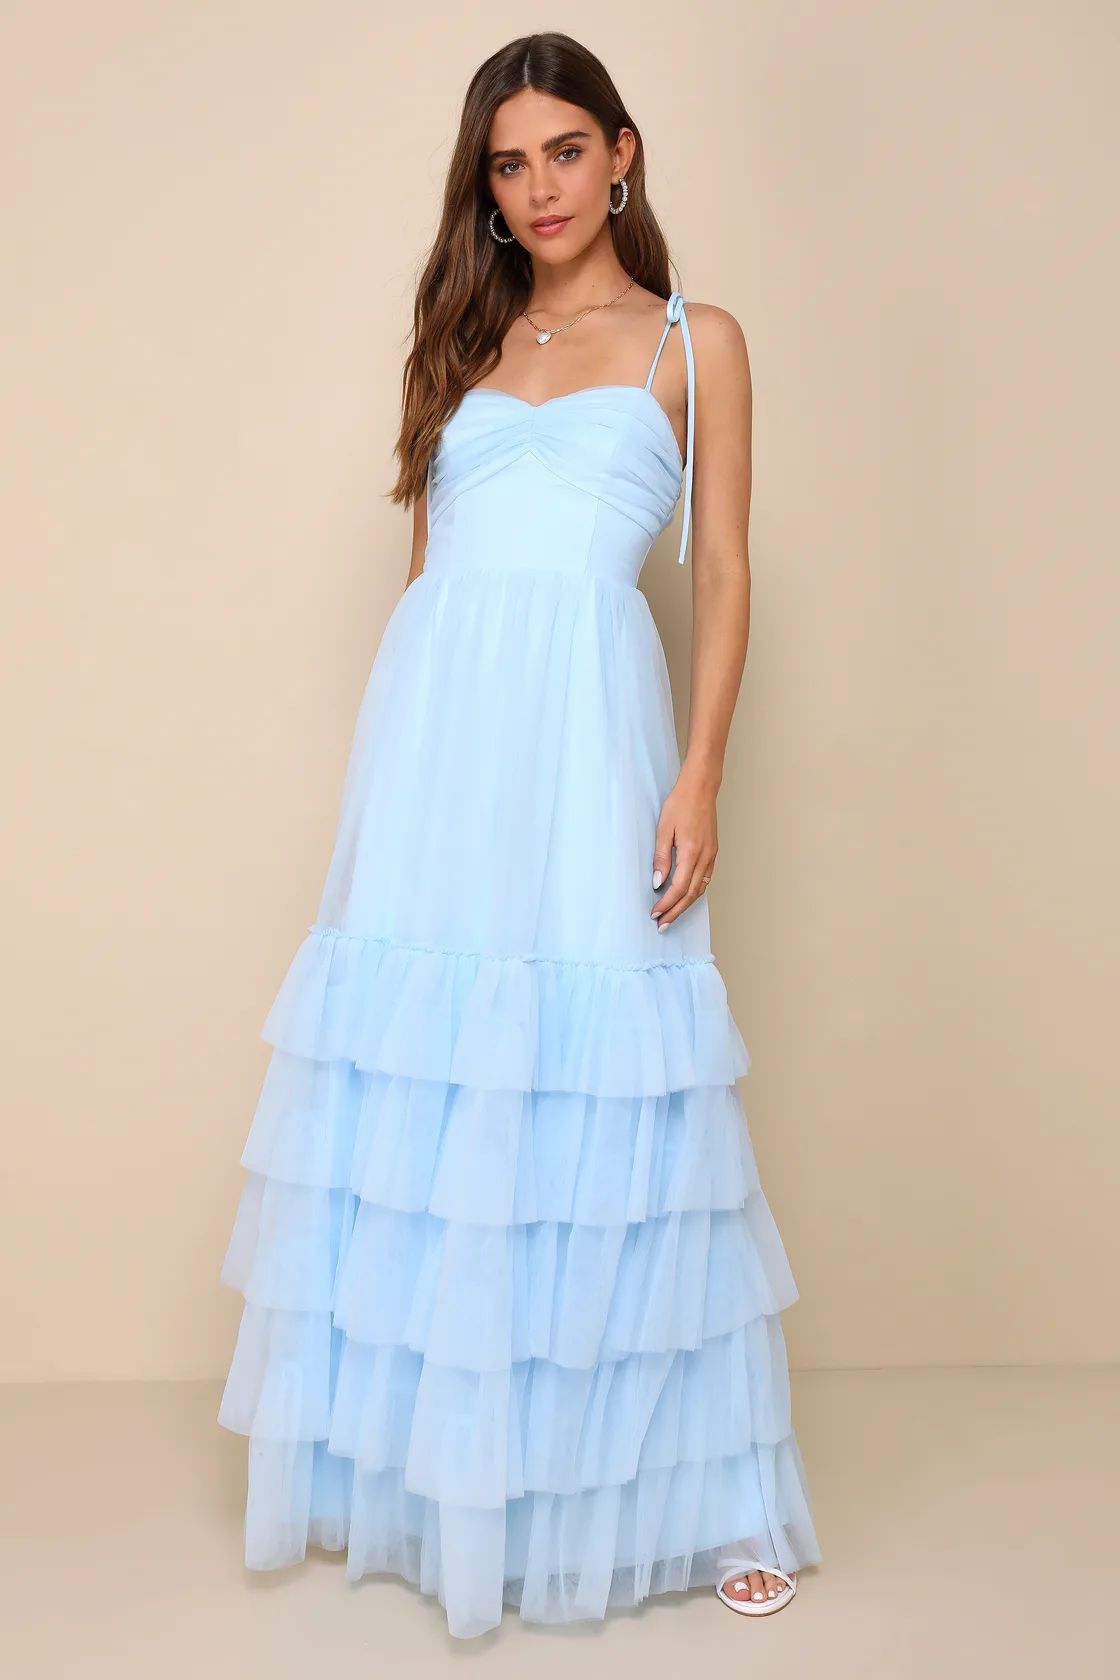 Endlessly Darling Light Blue Mesh Tiered Tie-Strap Maxi Dress | Lulus